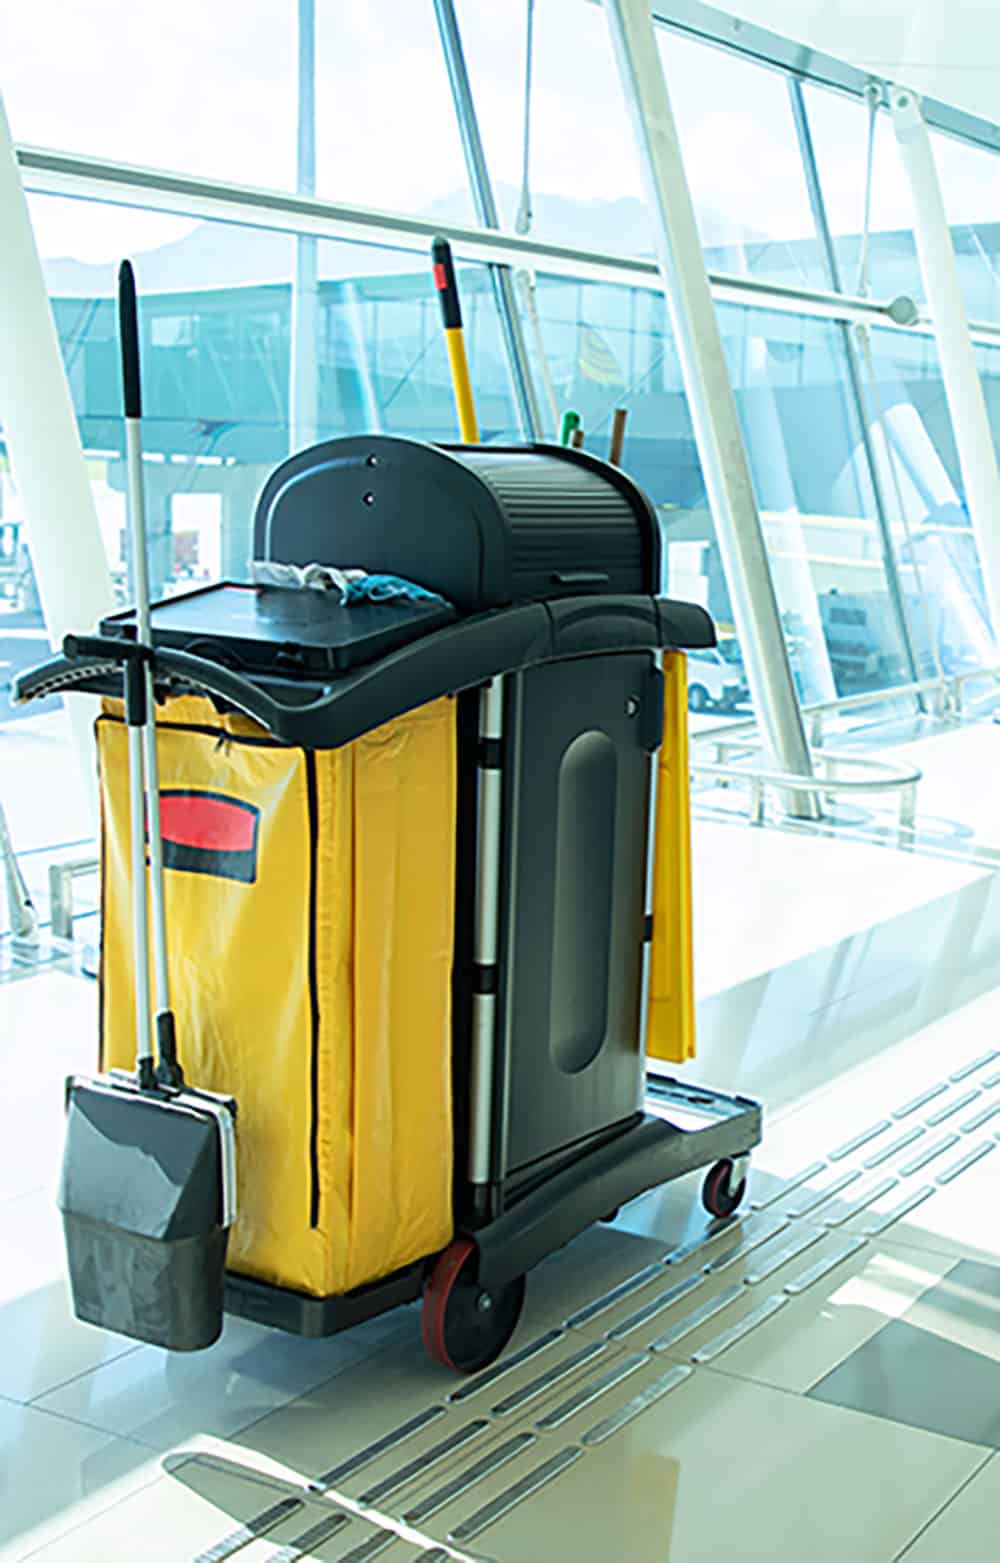 yellow cleaning cart by window